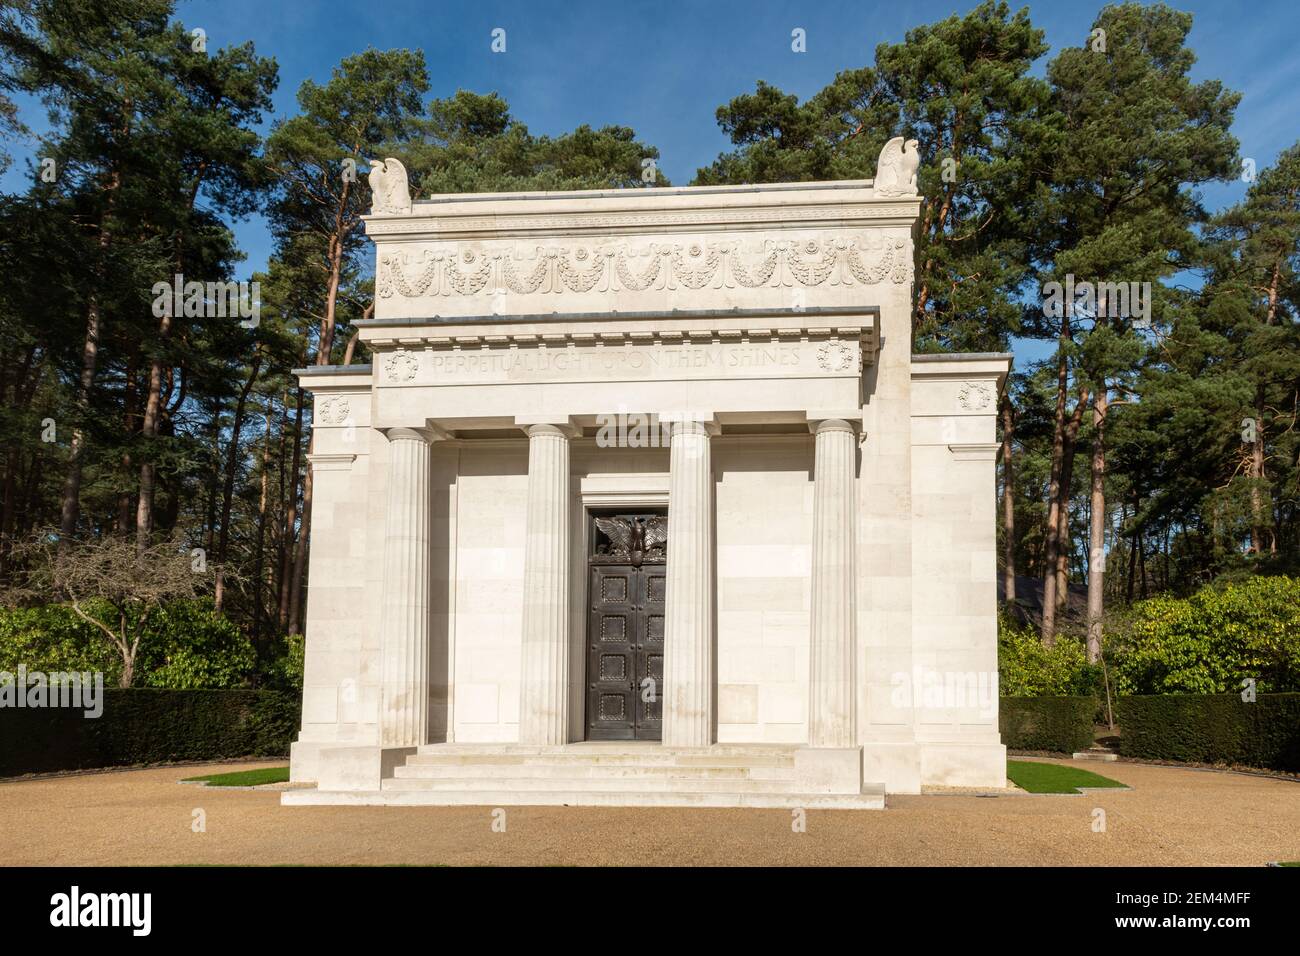 American memorial chapel at Brookwood Military Cemetery, Surrey, England, the only American Military Cemetery of World War I in the UK Stock Photo